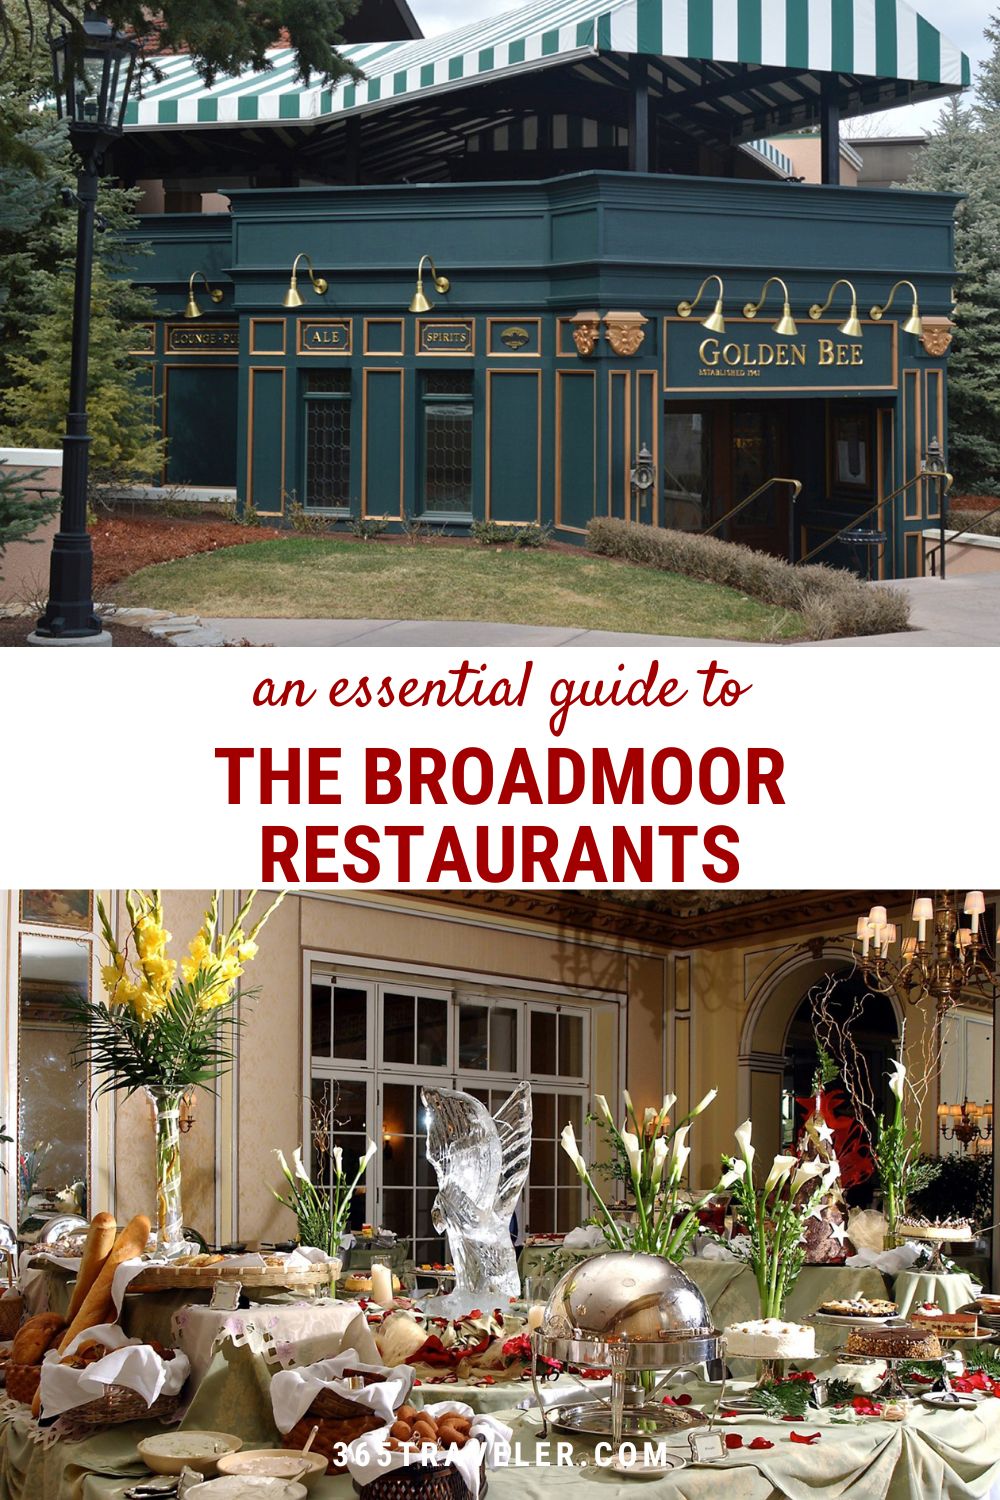 THE PERFECT BROADMOOR RESTAURANTS FOR EVERY OCCASION (+3 BONUSES)